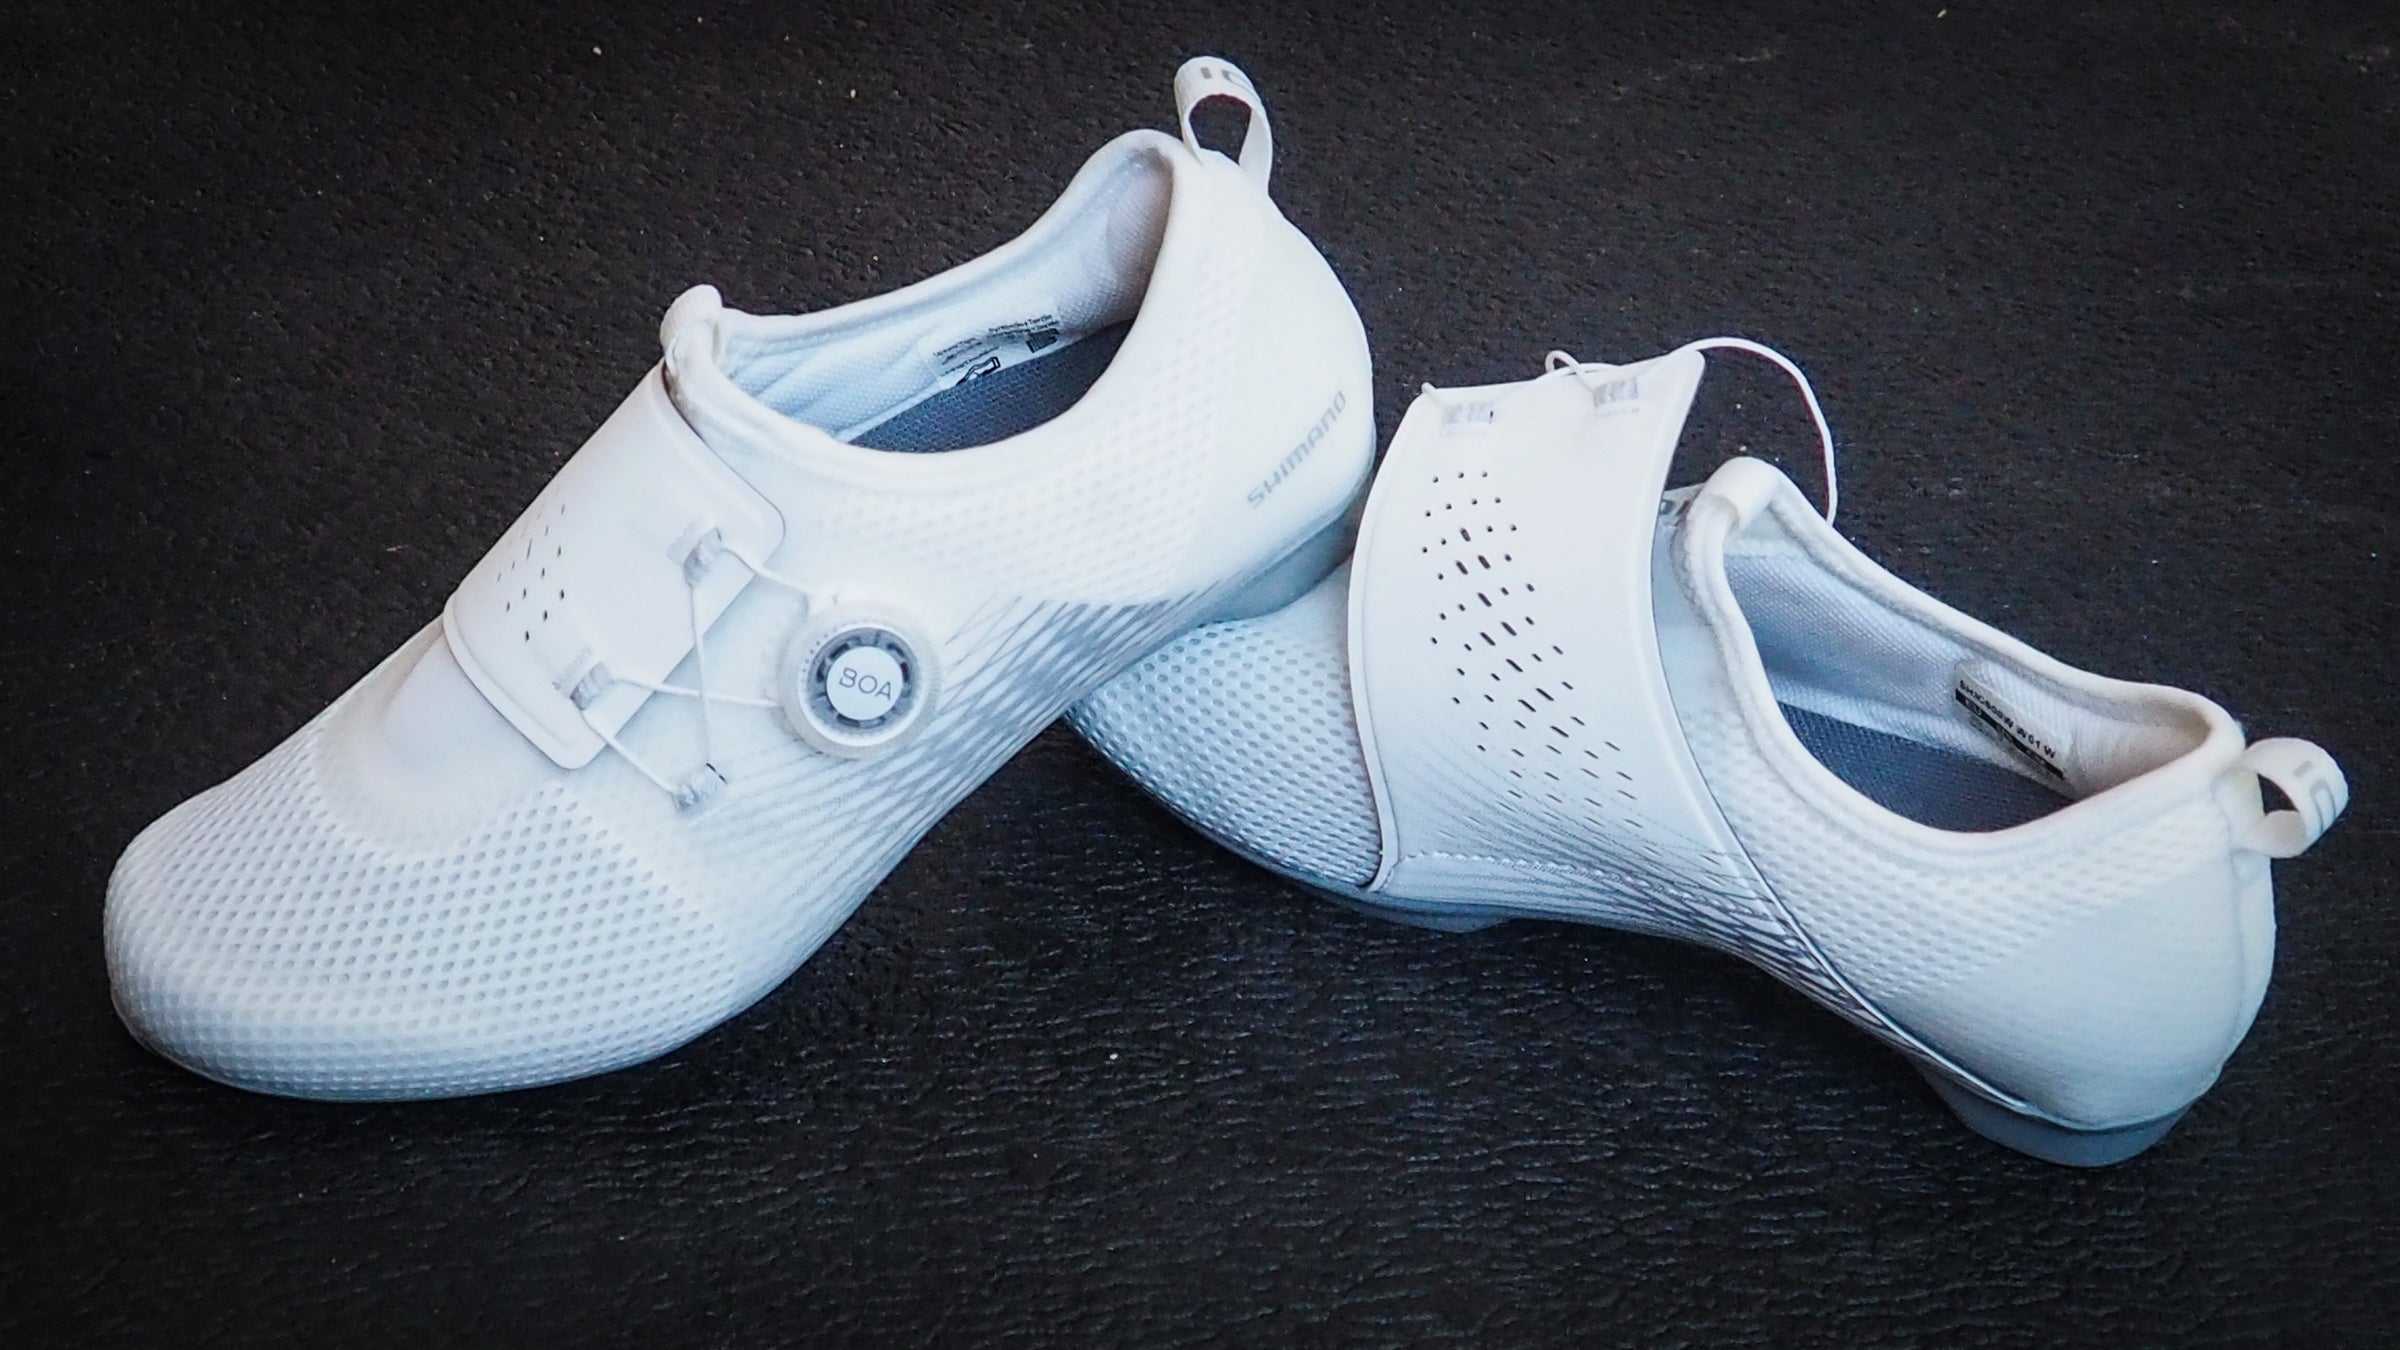 Shimano clips in for Spinning class, with super vented indoor cycling shoes  - Bikerumor